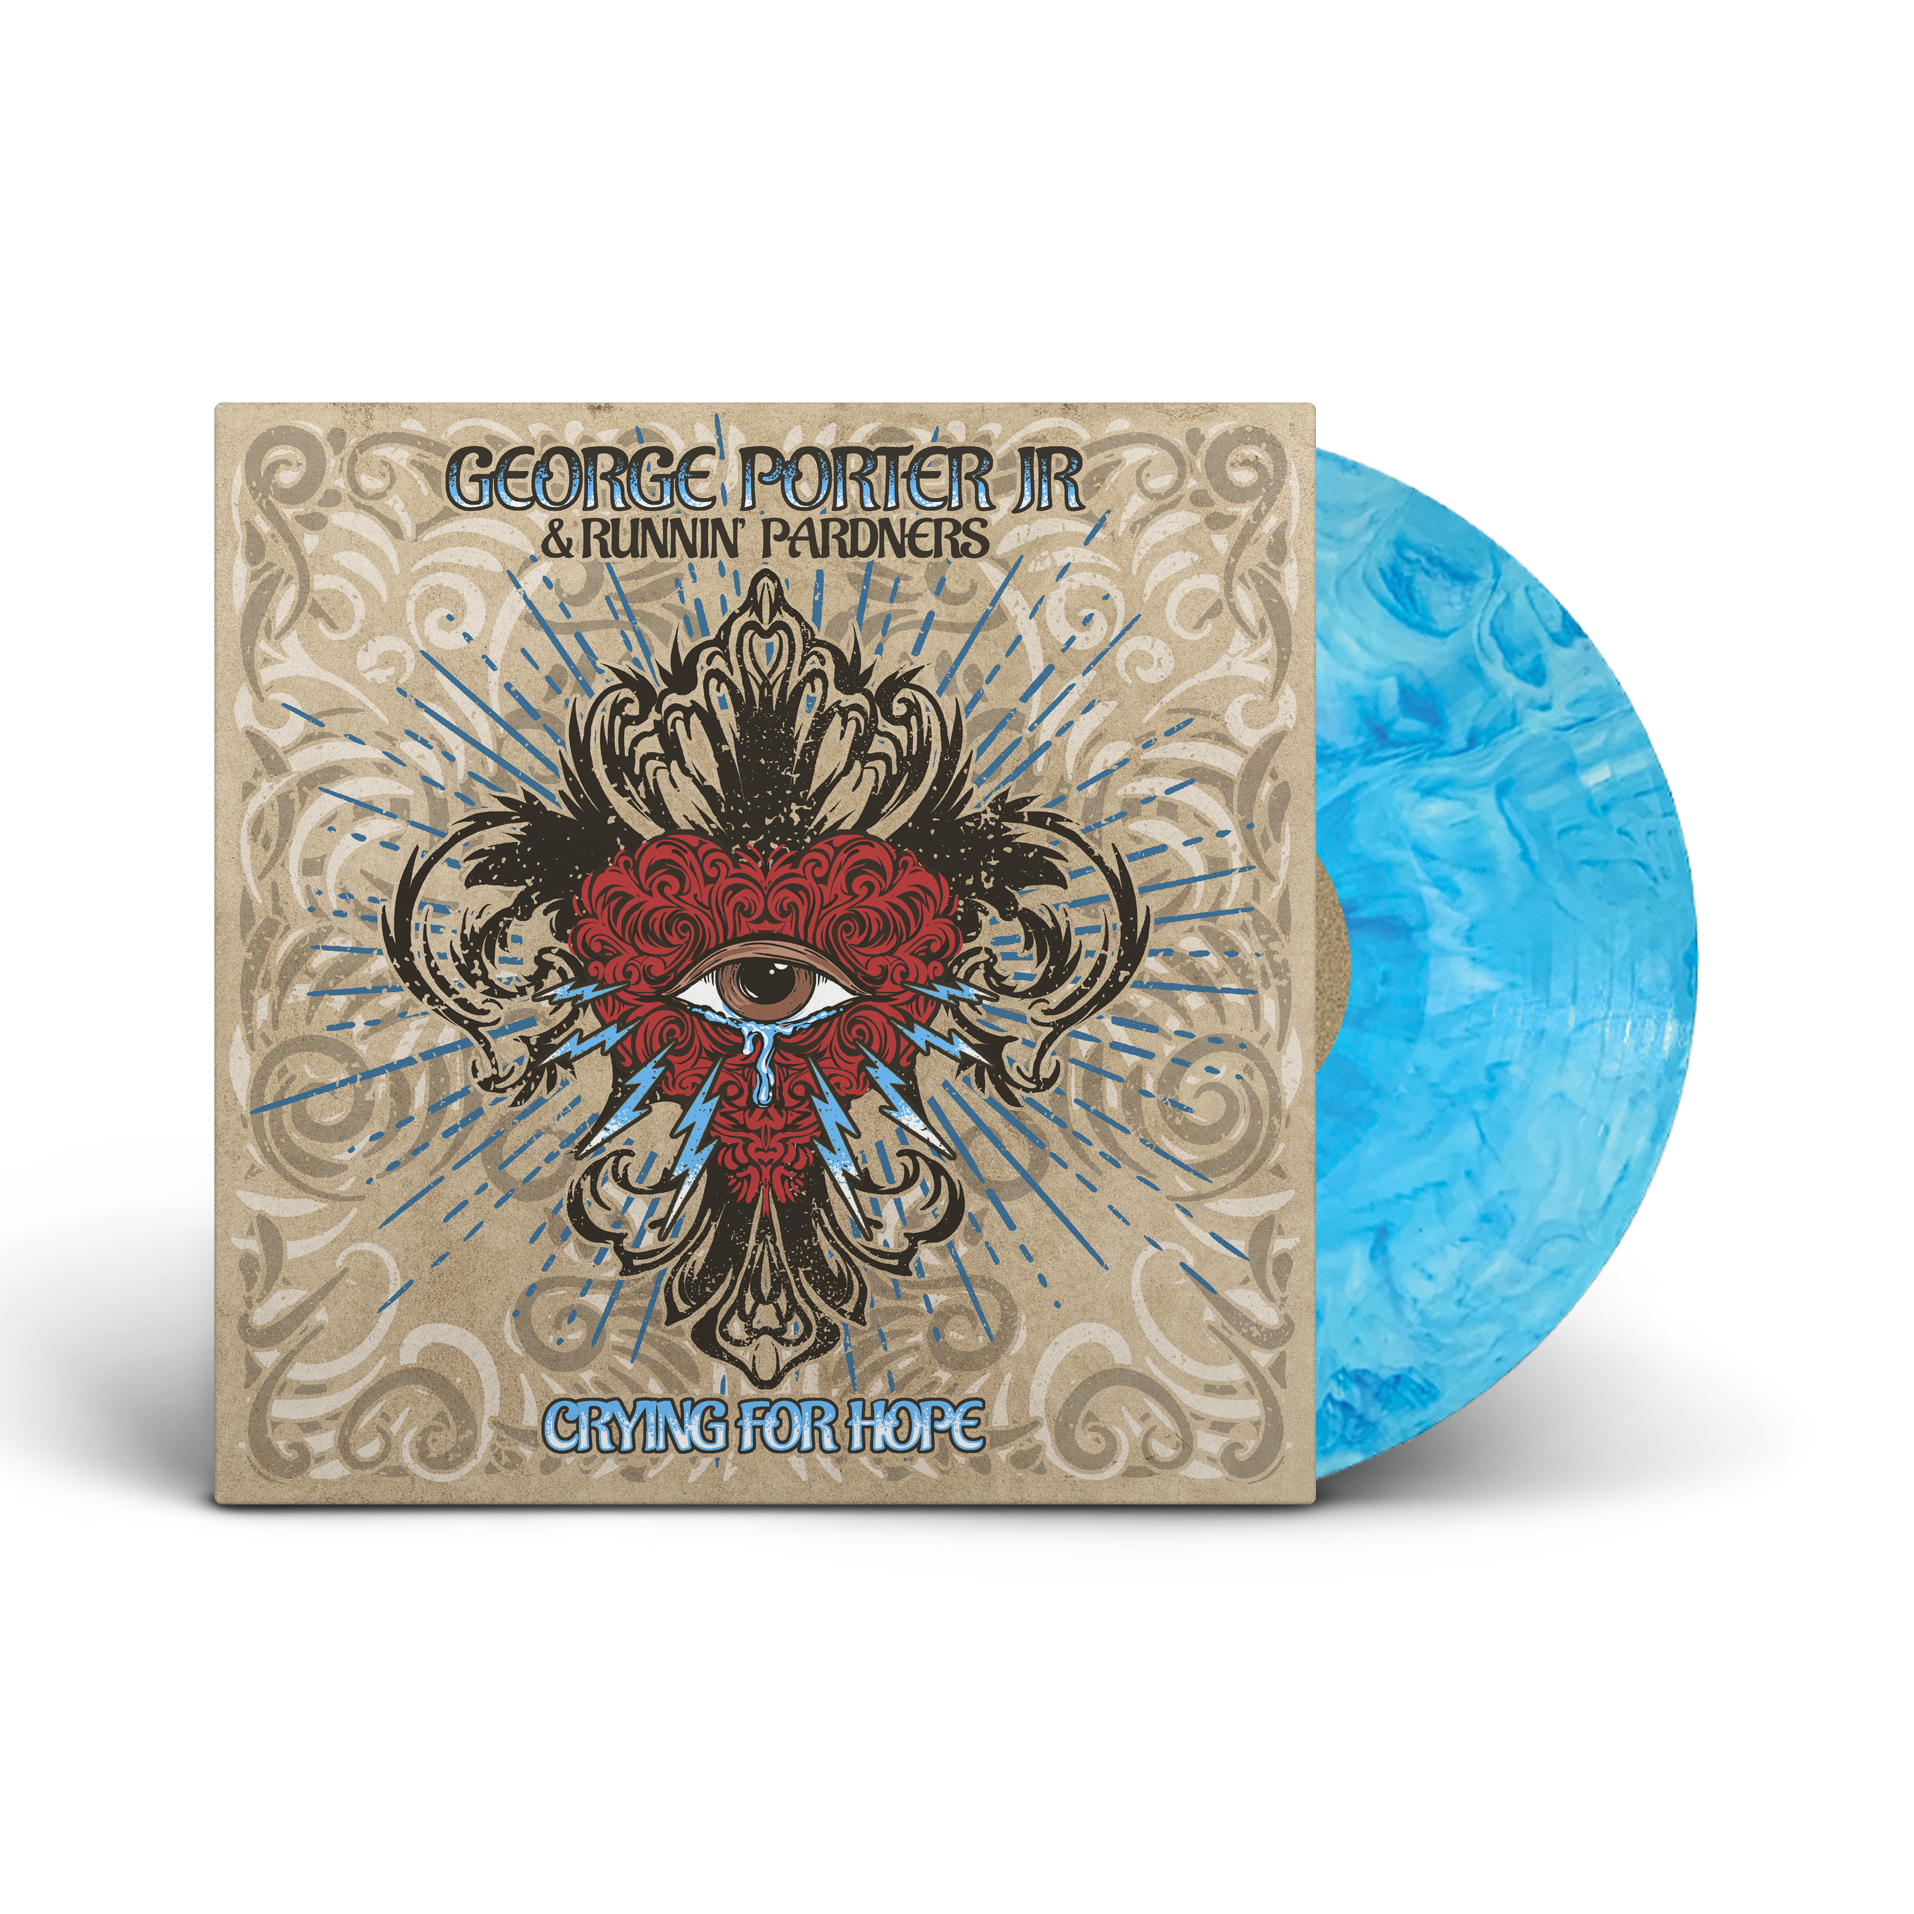 Crying for Hope Colored Double Vinyl